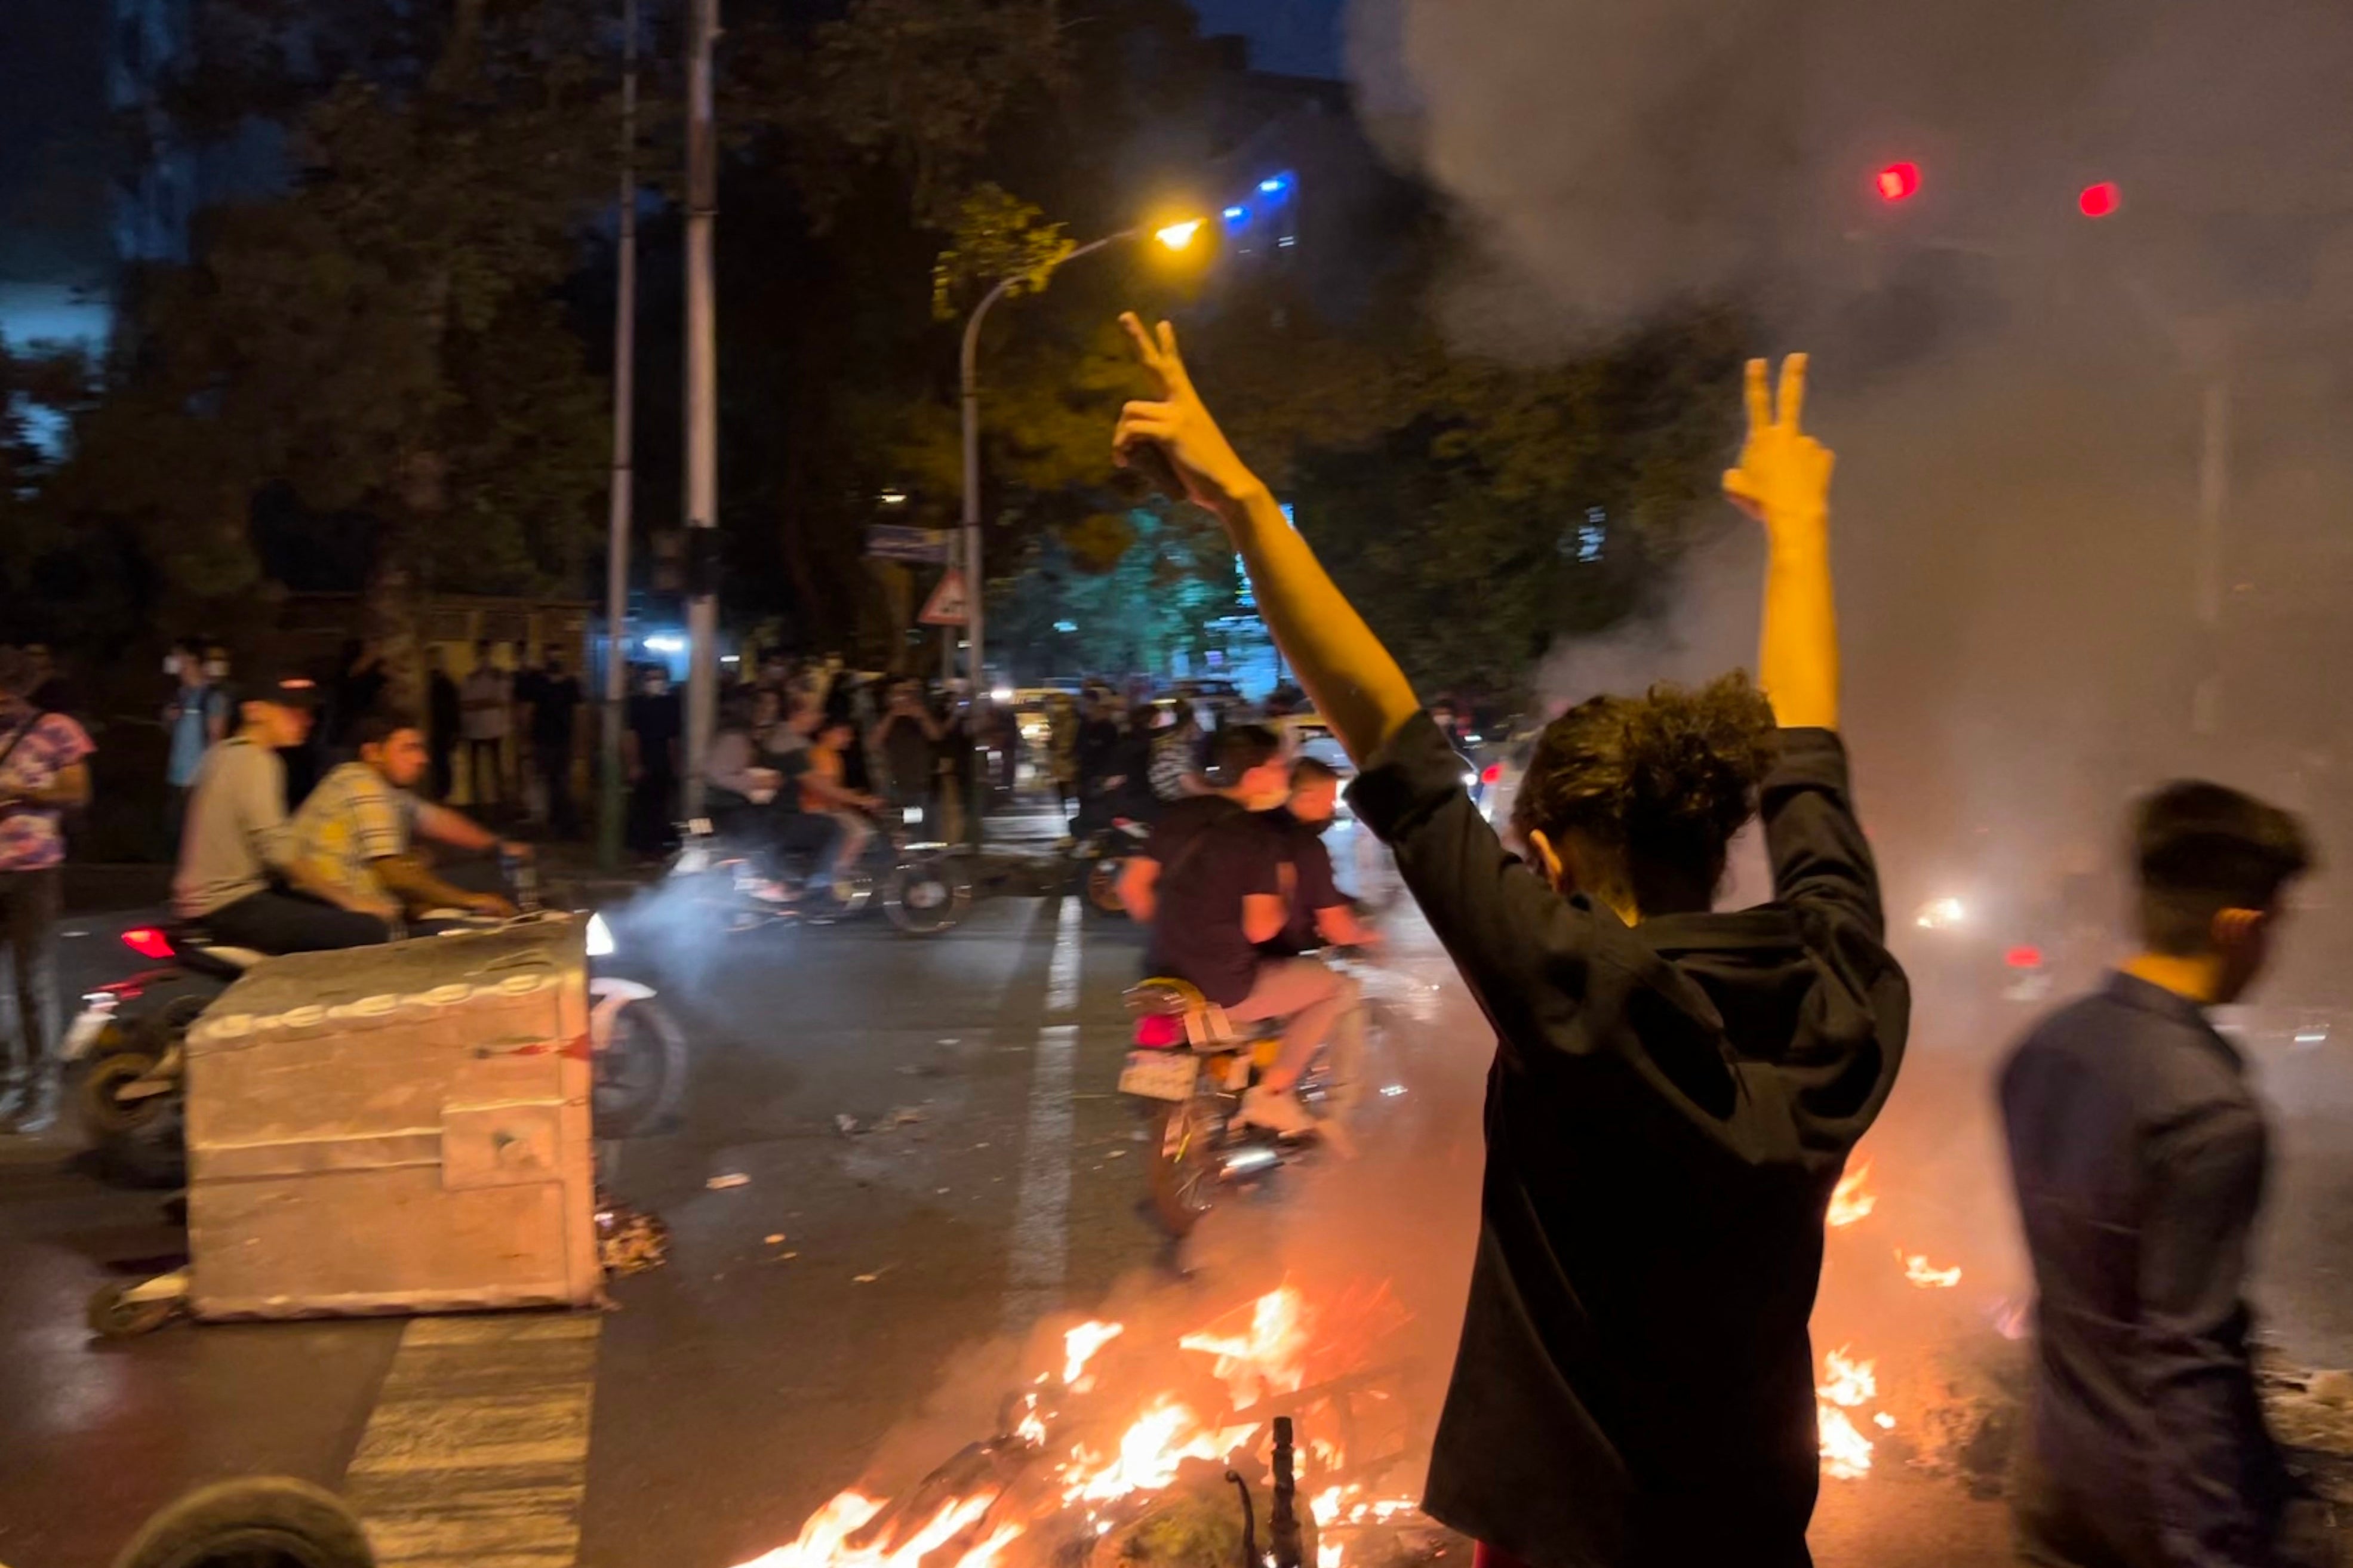 A demonstrator raises his arms and makes the victory sign during a protest for Mahsa Amini